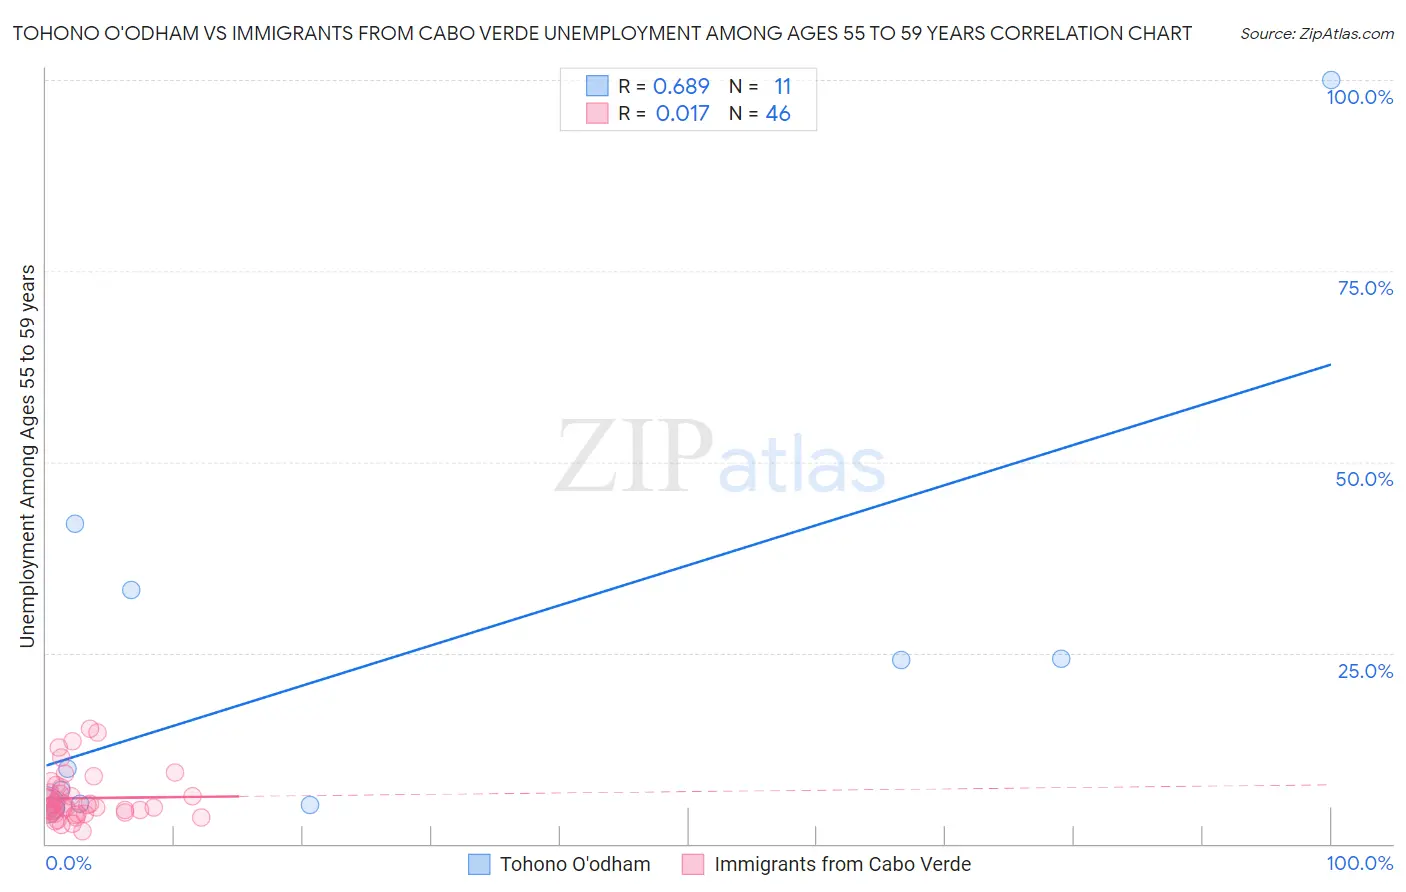 Tohono O'odham vs Immigrants from Cabo Verde Unemployment Among Ages 55 to 59 years